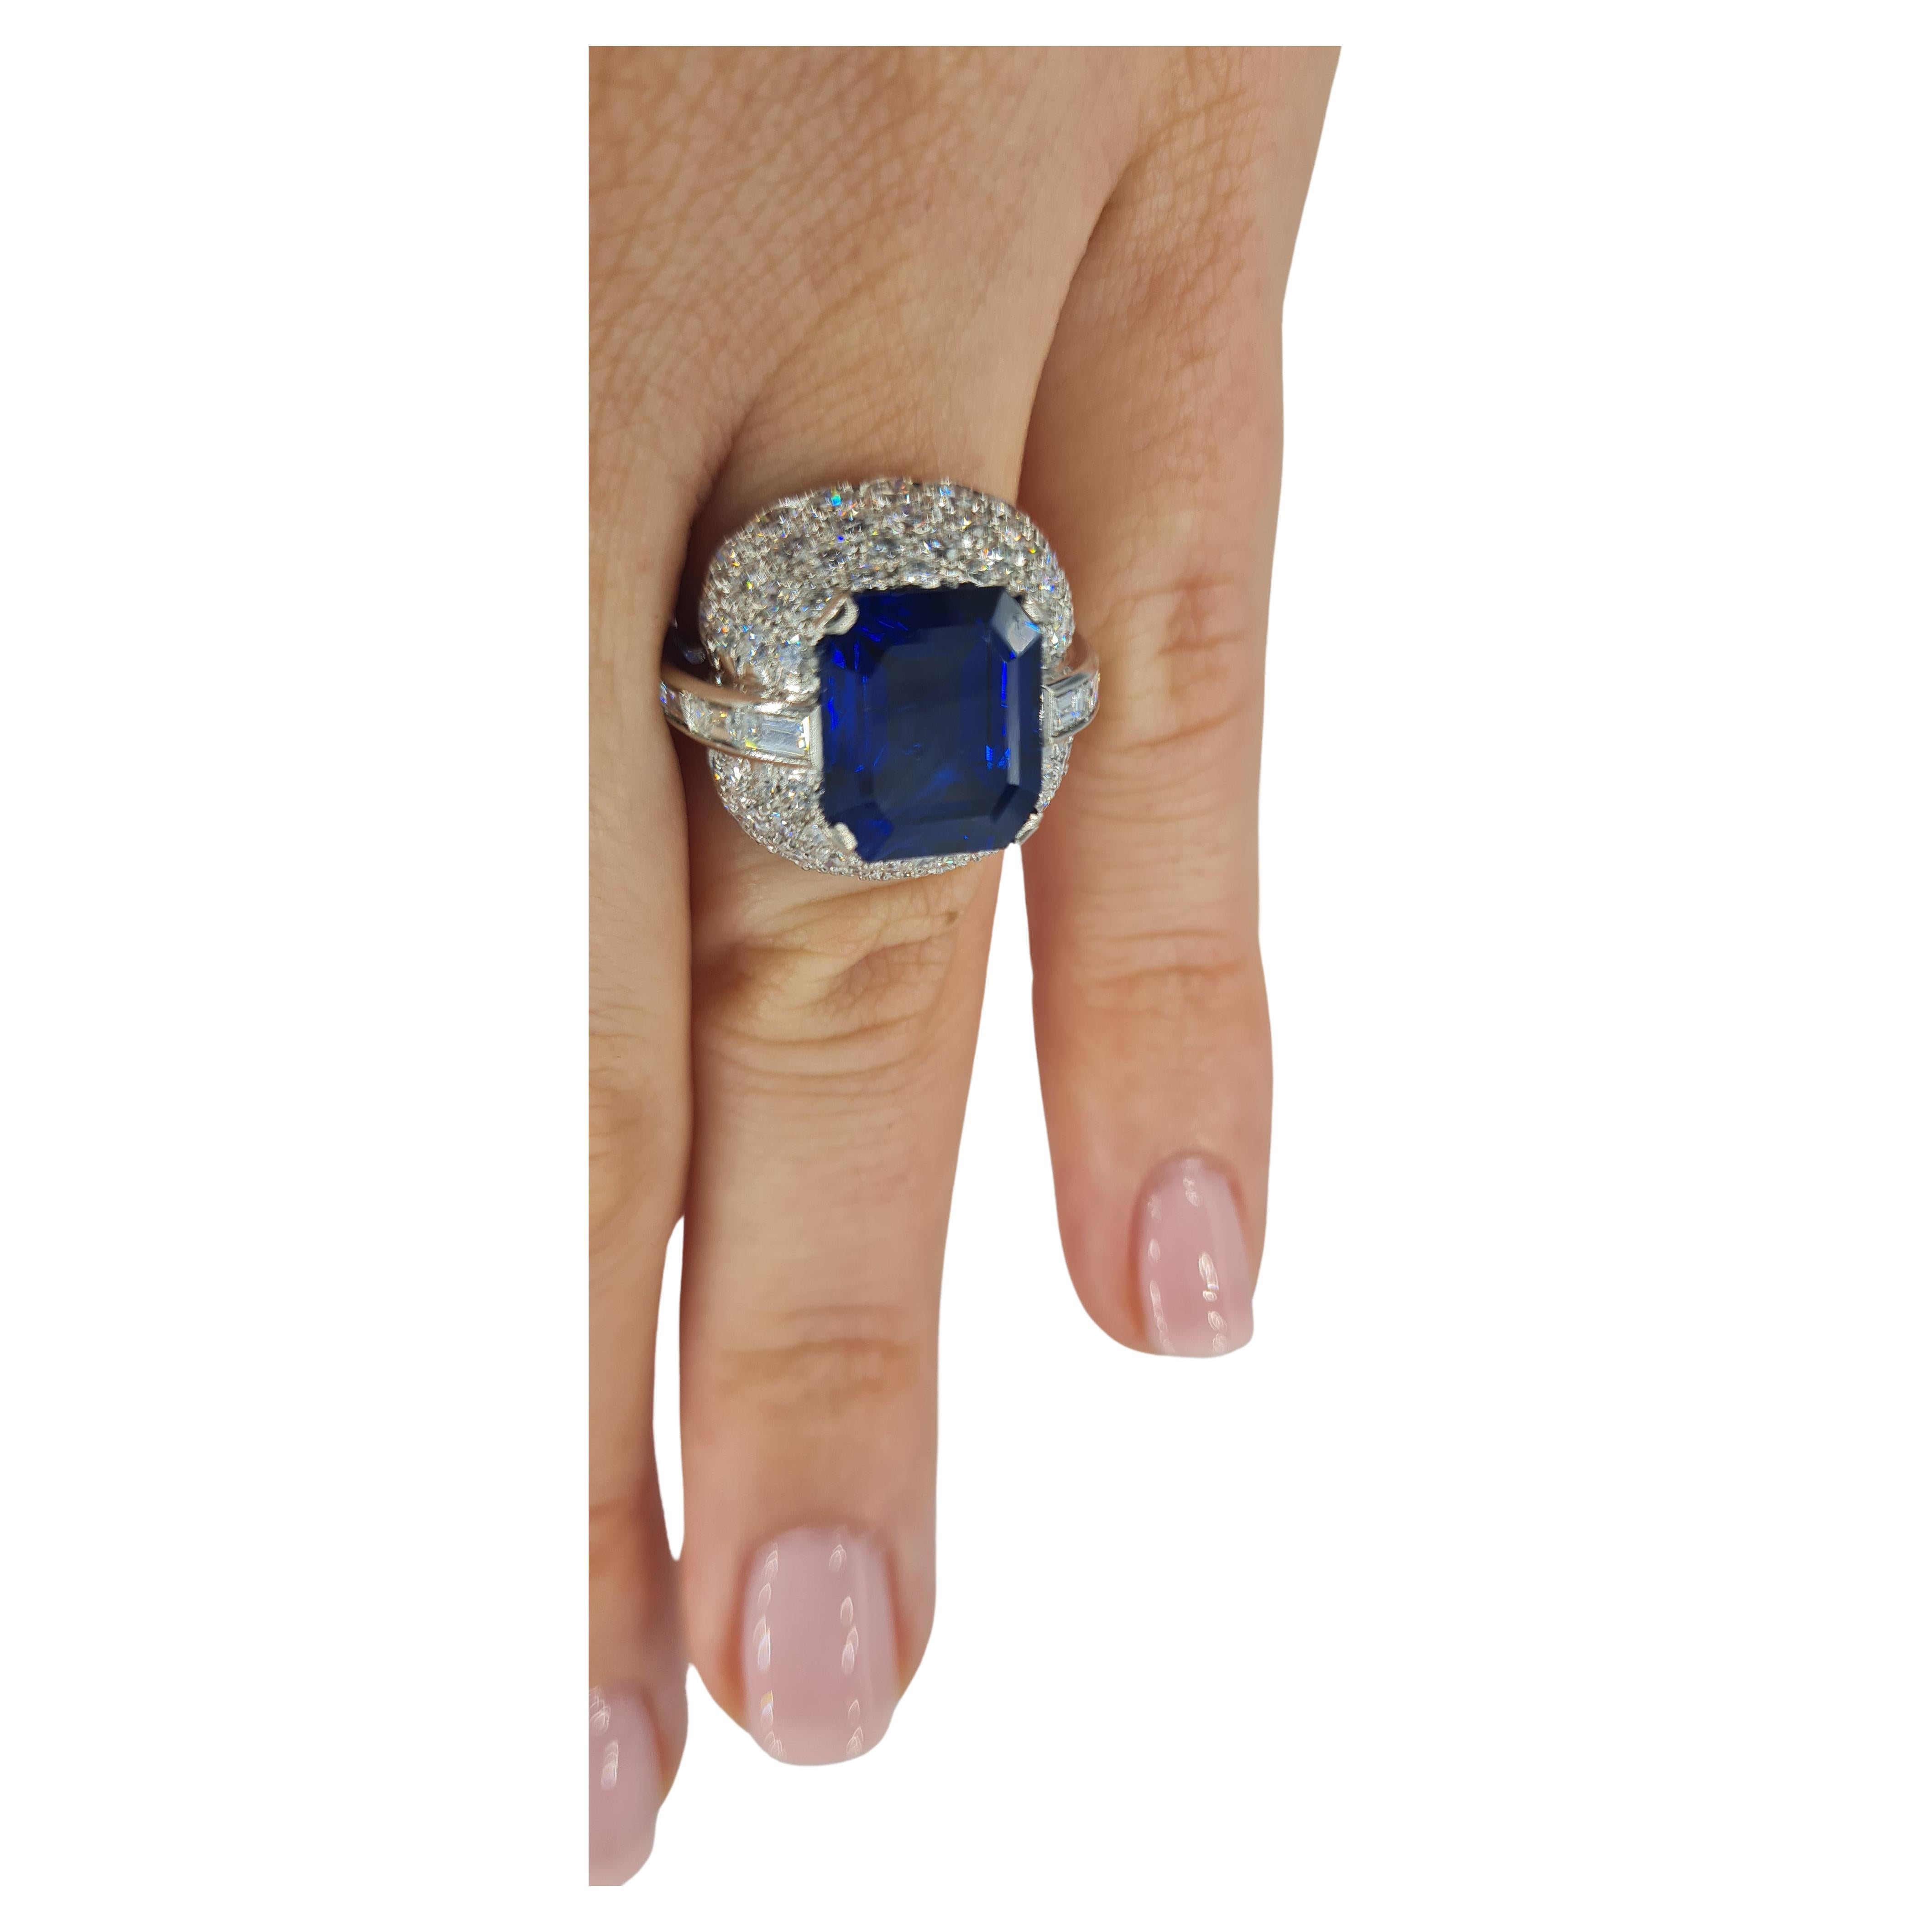 An exquisite ring composed by an amazing no heated royal blue myanmar burmese sapphire ring set in solid platinum.

The ring has been handmade in Italy 